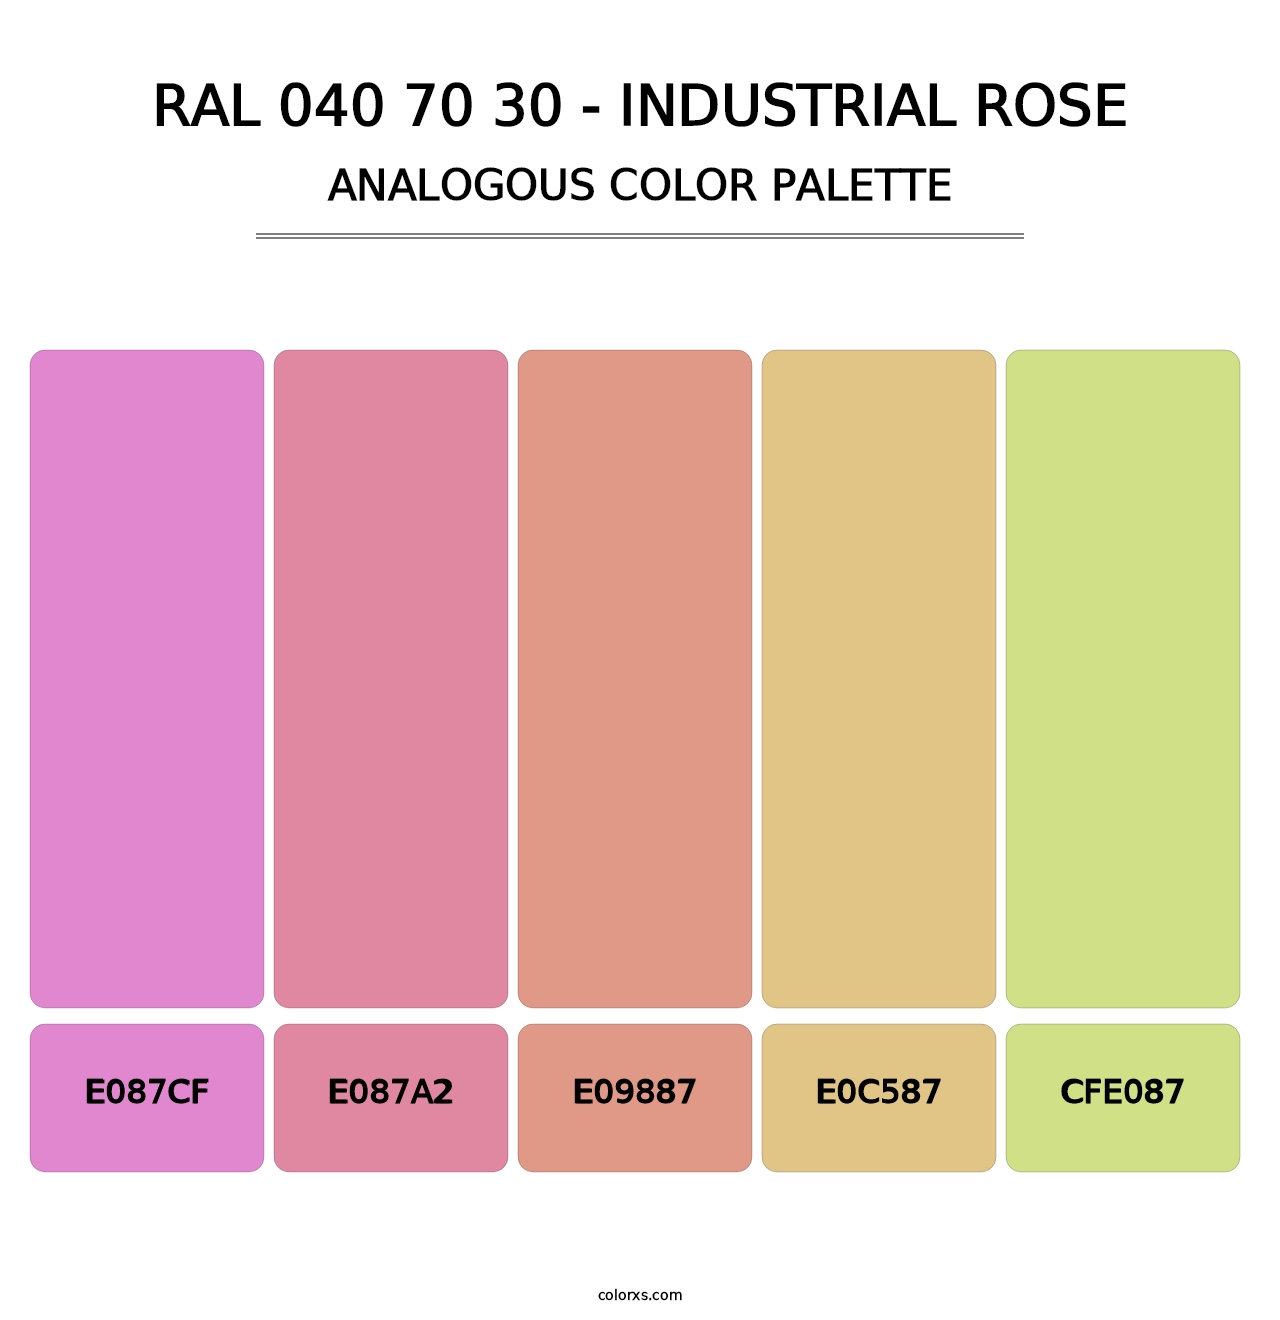 RAL 040 70 30 - Industrial Rose - Analogous Color Palette